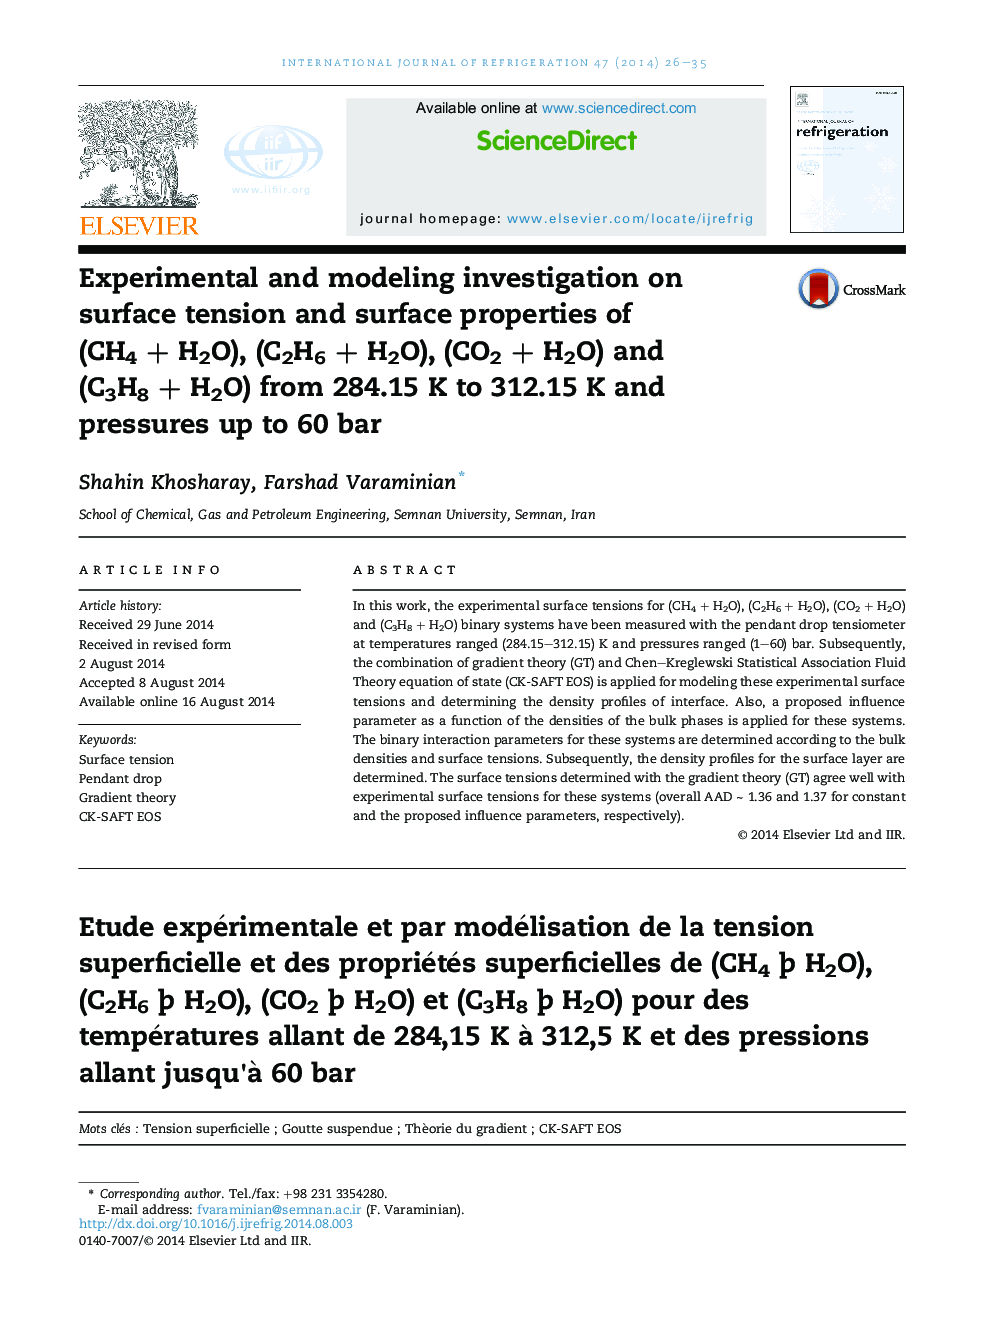 Experimental and modeling investigation on surface tension and surface properties of (CH4 + H2O), (C2H6 + H2O), (CO2 + H2O) and (C3H8 + H2O) from 284.15 K to 312.15 K and pressures up to 60 bar